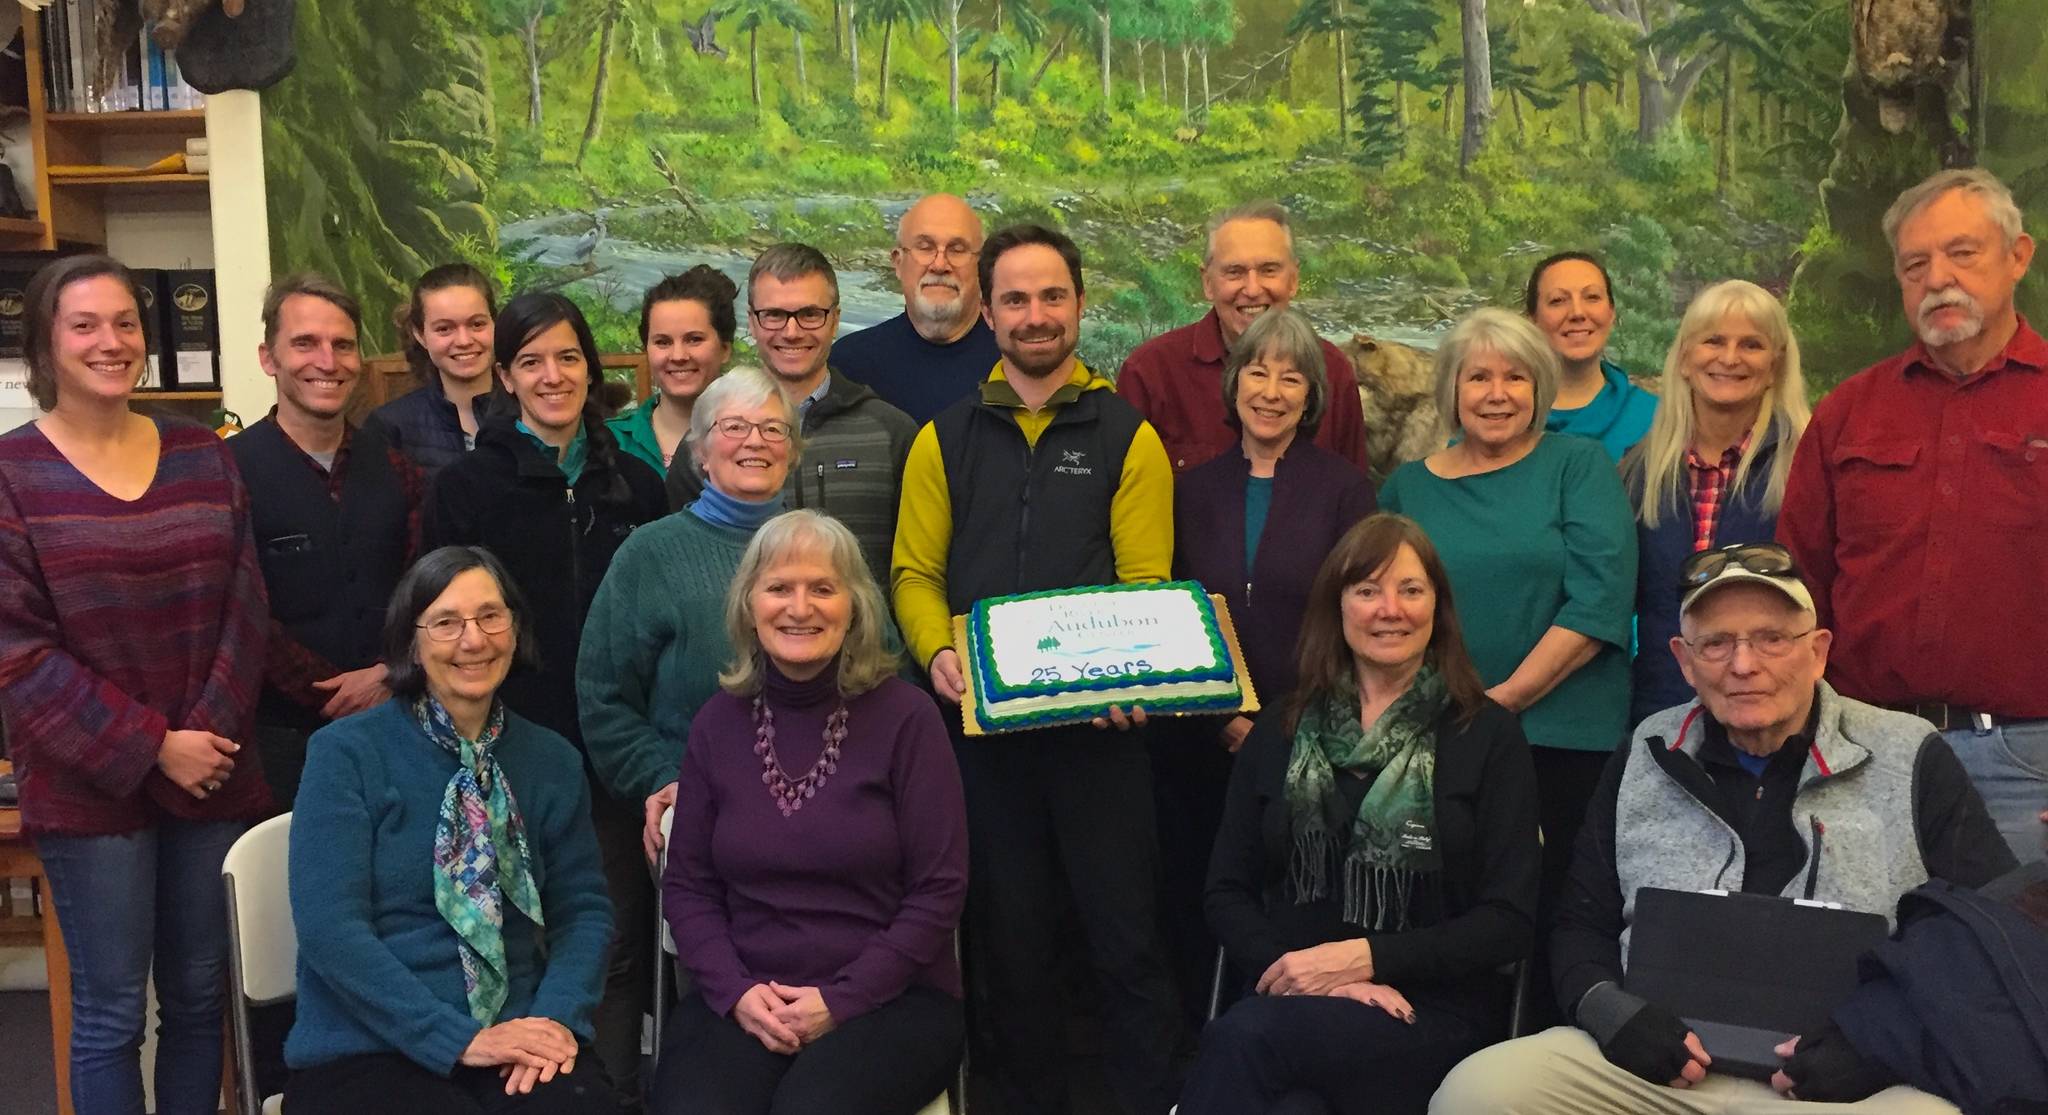 Dungeness River Center Board members celebrate the 25th anniversary of its incorporation as a nonprofit organization. Pictured are (back row, from left) education coordinator Jenna Ziogas, Neil Harrington, Vita Olson, Sara Cendeja-Zarelli, Alissa Lofstrom, Shirley Anderson, president Greg Voyles, vice president Dennis Dickson, director Powell Jones, Carl Siver, Darcy McNamara, treasurer Wanda Schneider, administrative manager Vanessa Fuller, Annette Nesse and Bob Phreaner, with (front row, from left) Lyn Muench, Annette Hanson, secretary Ann Sargent and Ken Weirsma. Photo courtesy of Dungeness River Audubon Center